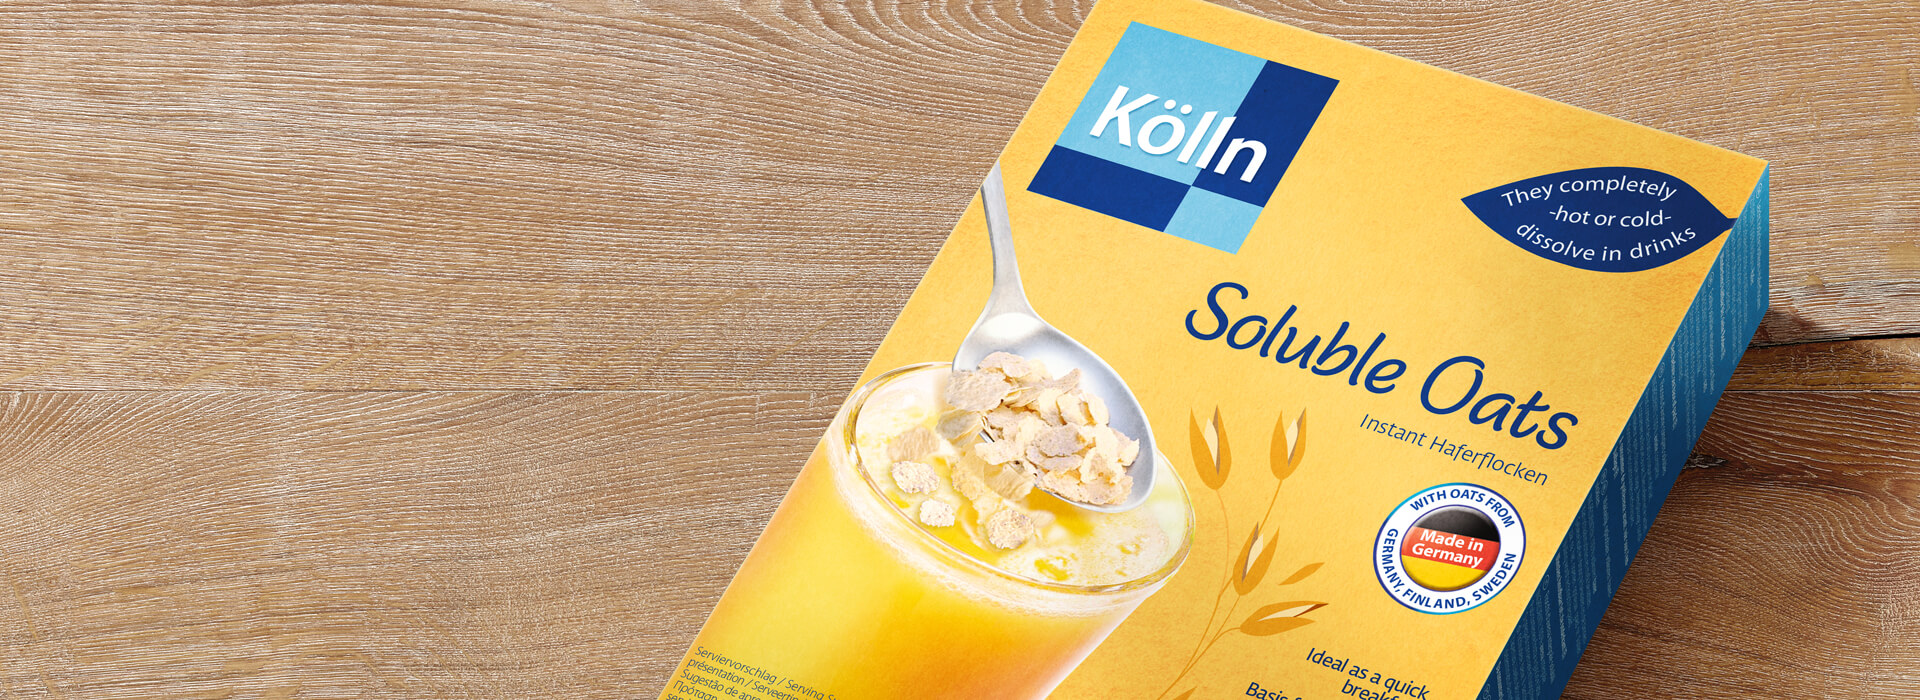 Koelln Soluble Oats Pack on Table